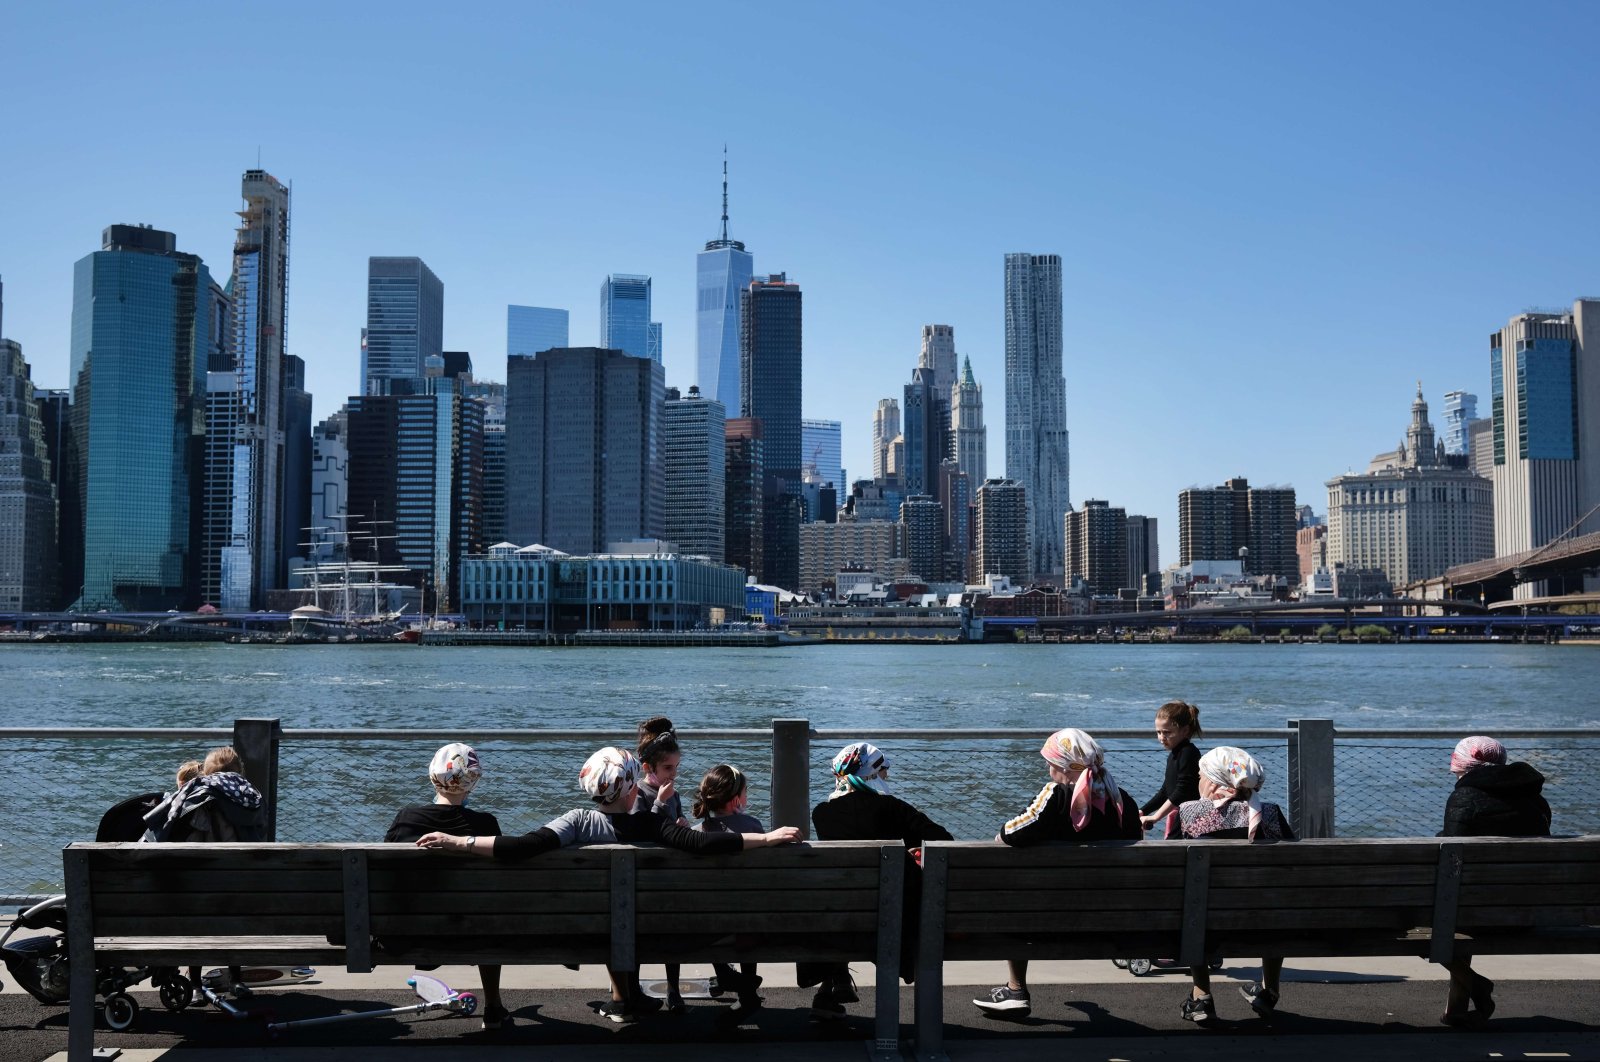 People enjoy a spring afternoon in Brooklyn Bridge Park on April 28, 2020 in the Brooklyn borough of New York City. (AFP Photo)